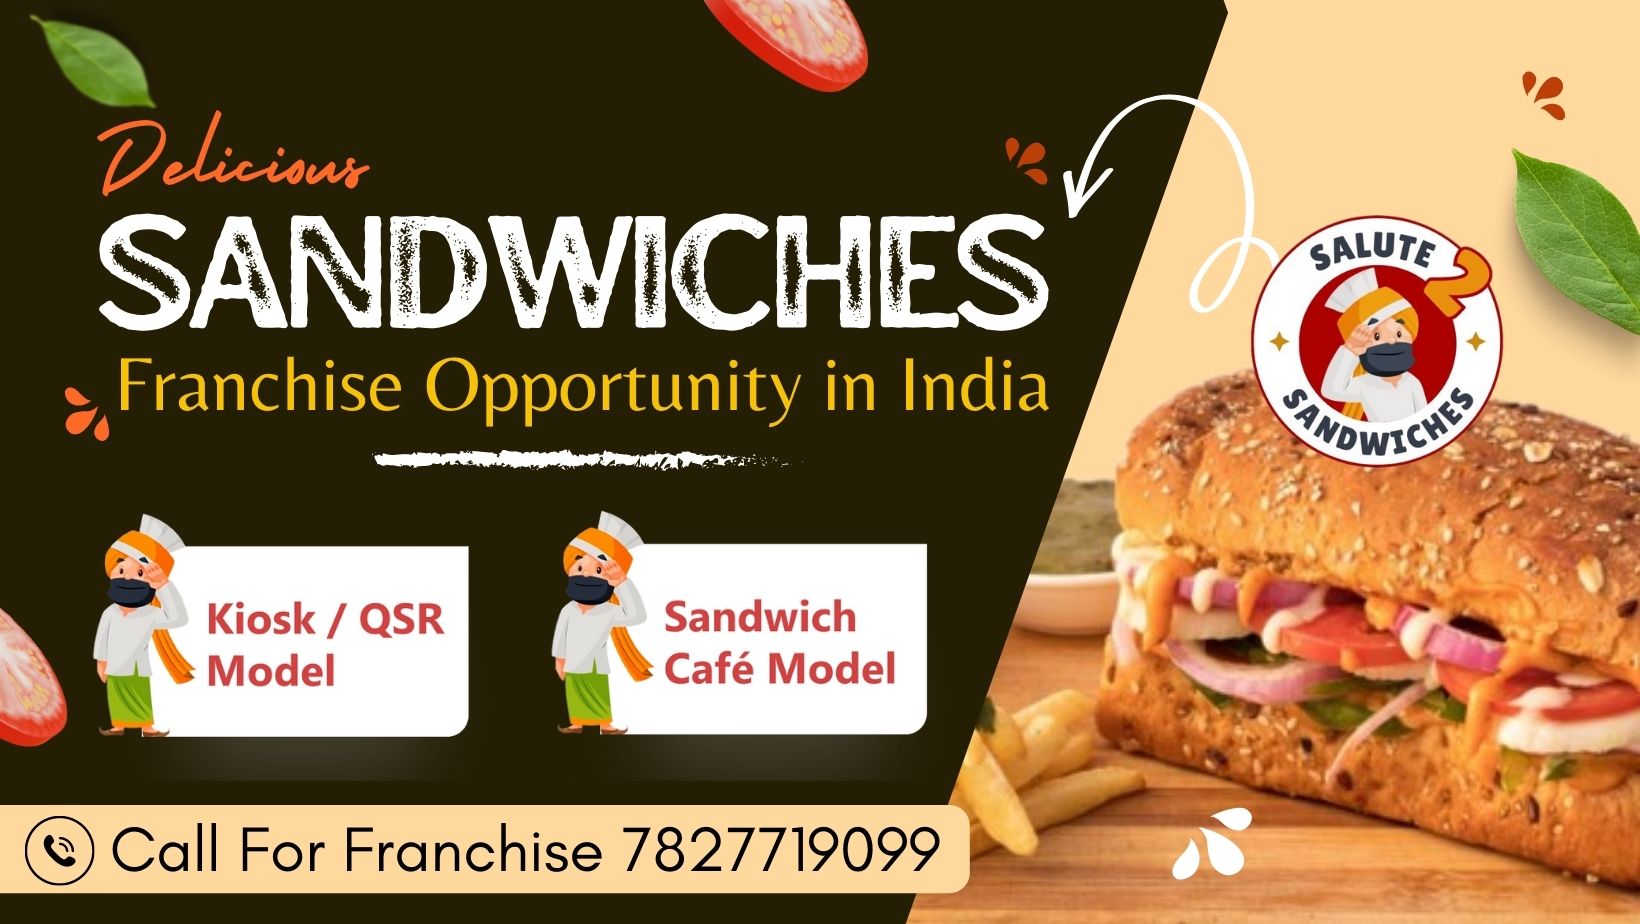 salute 2 sandwiches Franchise Opportunity in india